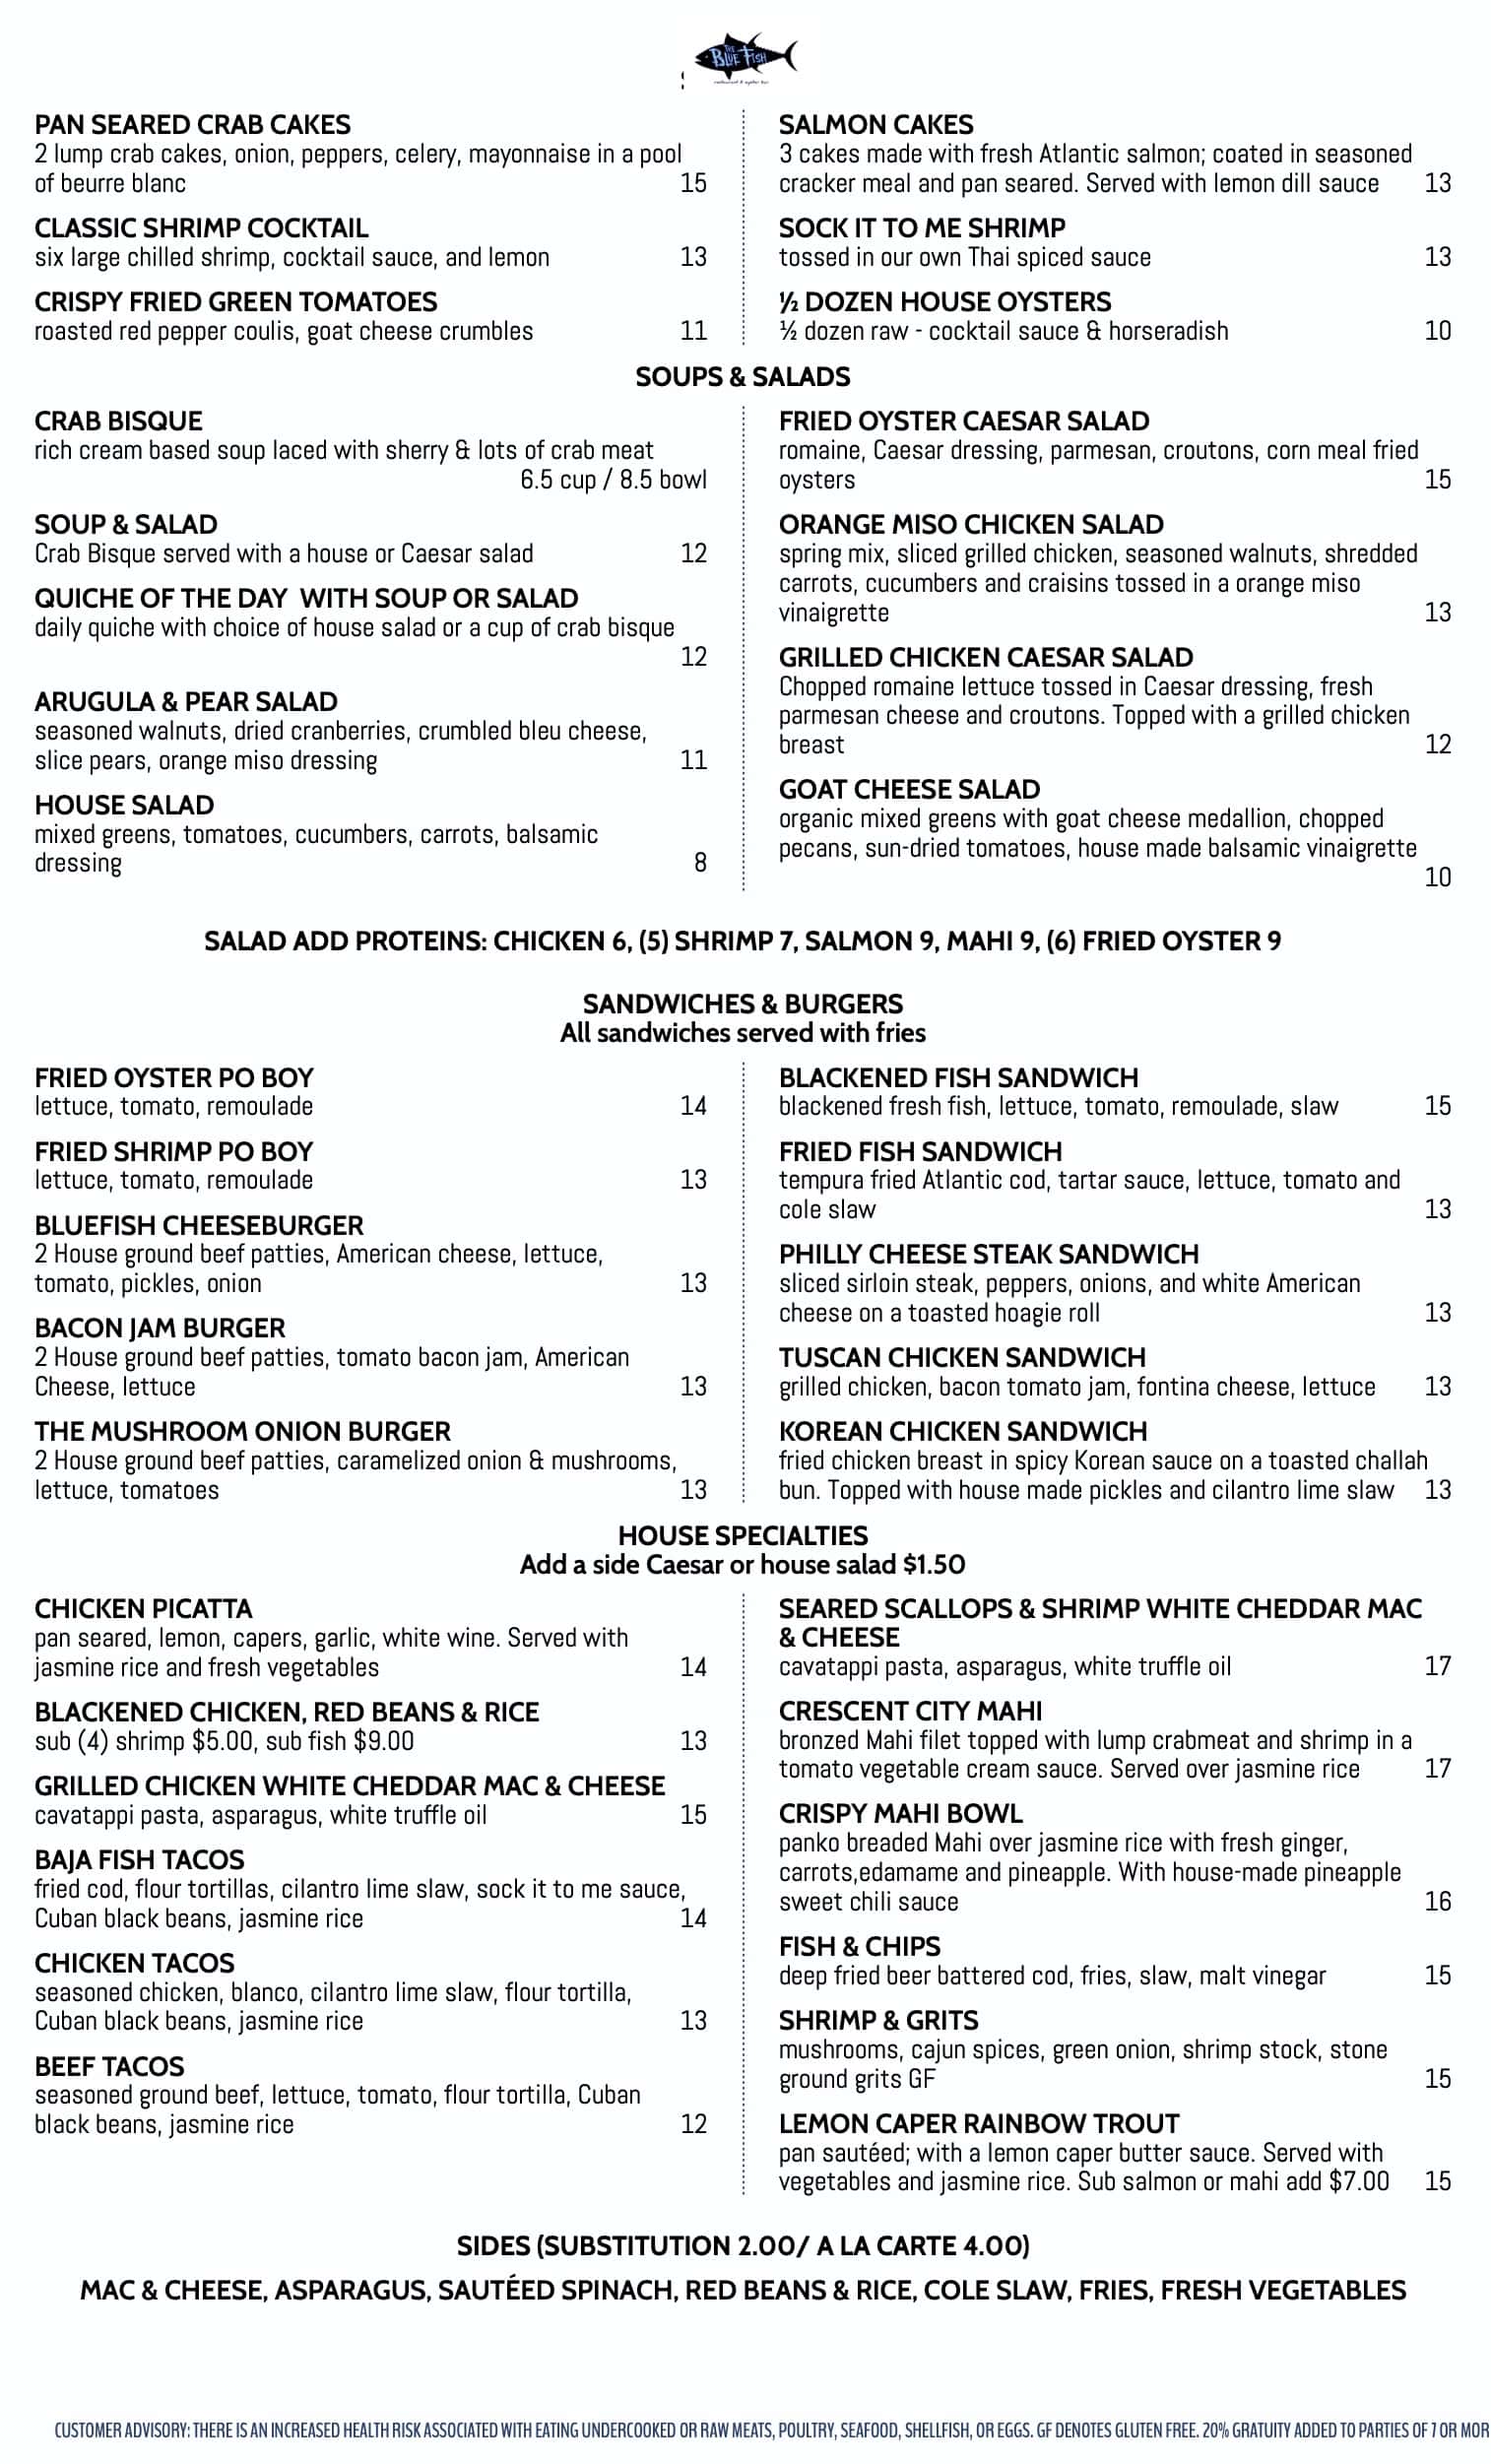 The Blue Fish Restaurant and Oyster Bar Menu With Prices